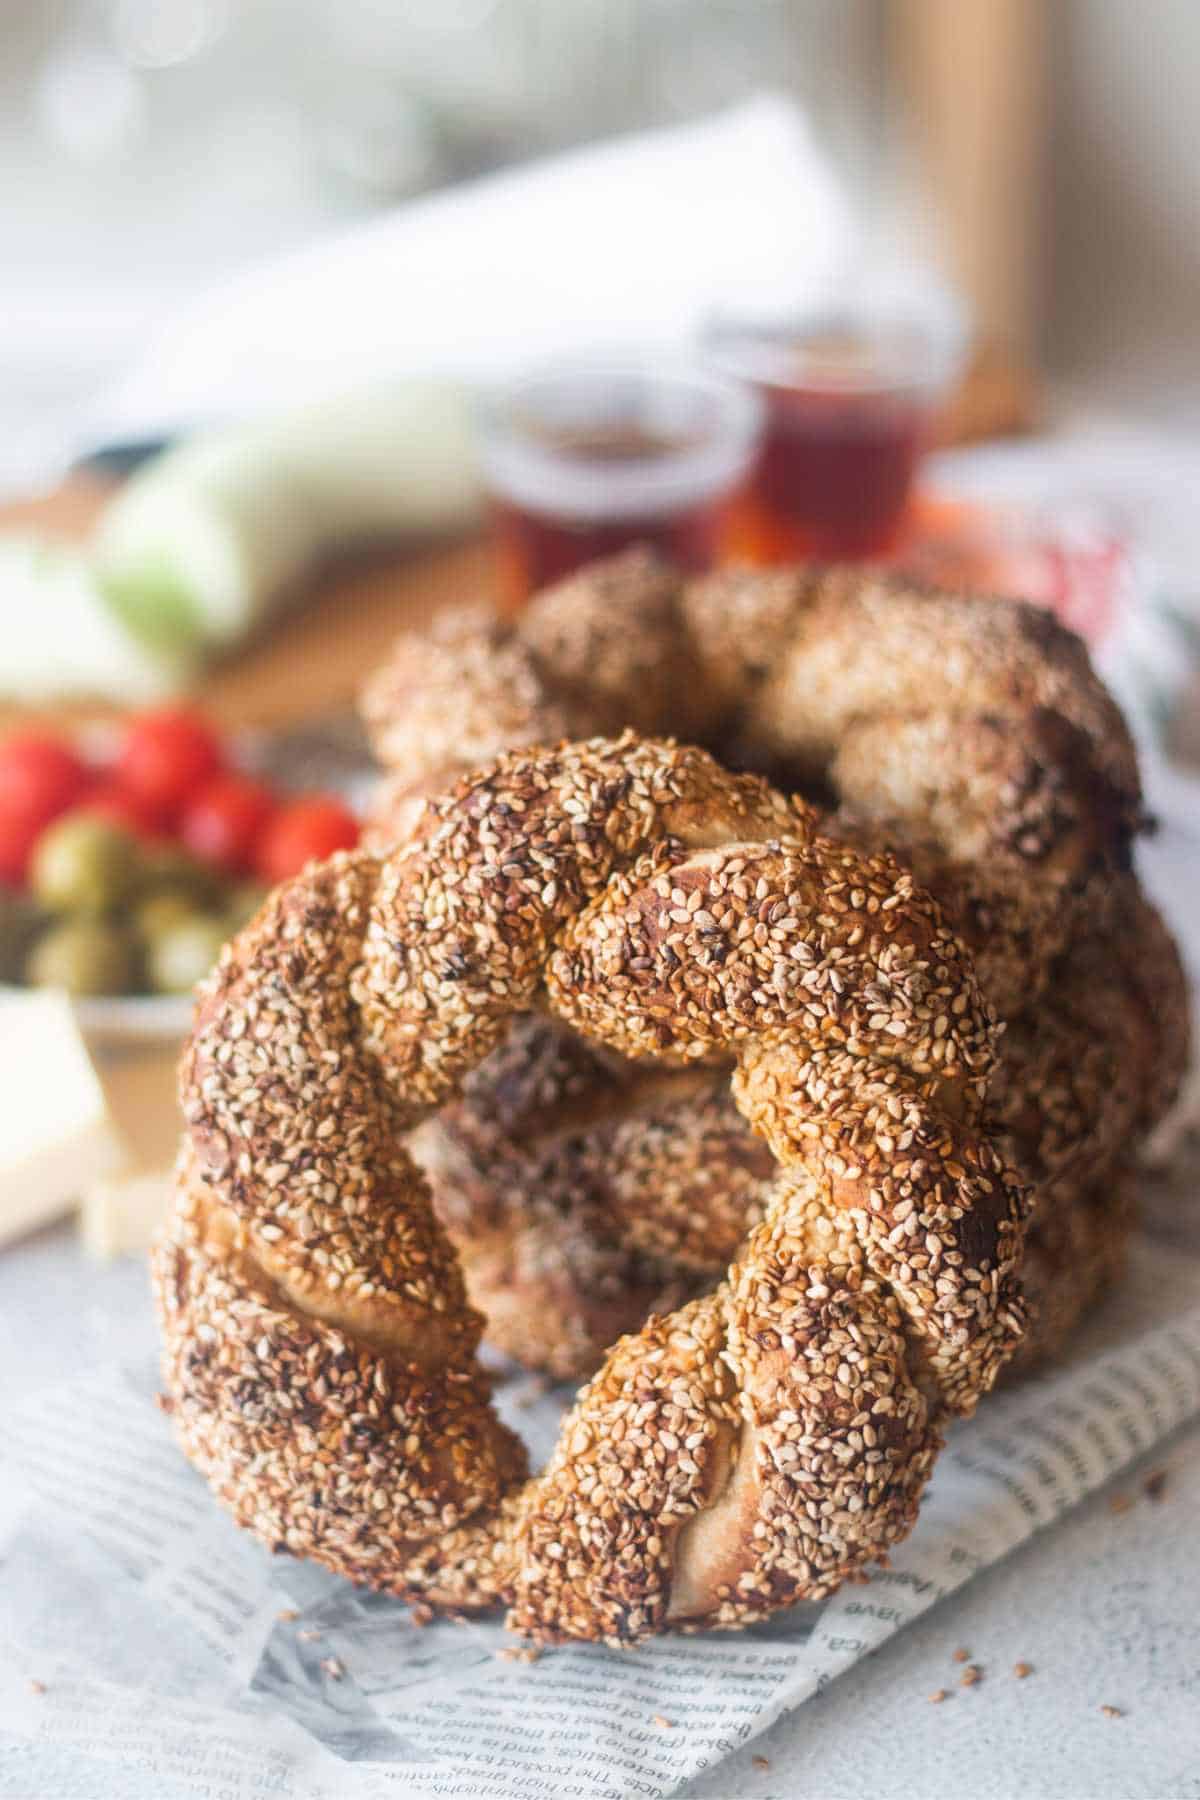 sesame crusted simit bread in the front with stacked bread behind it